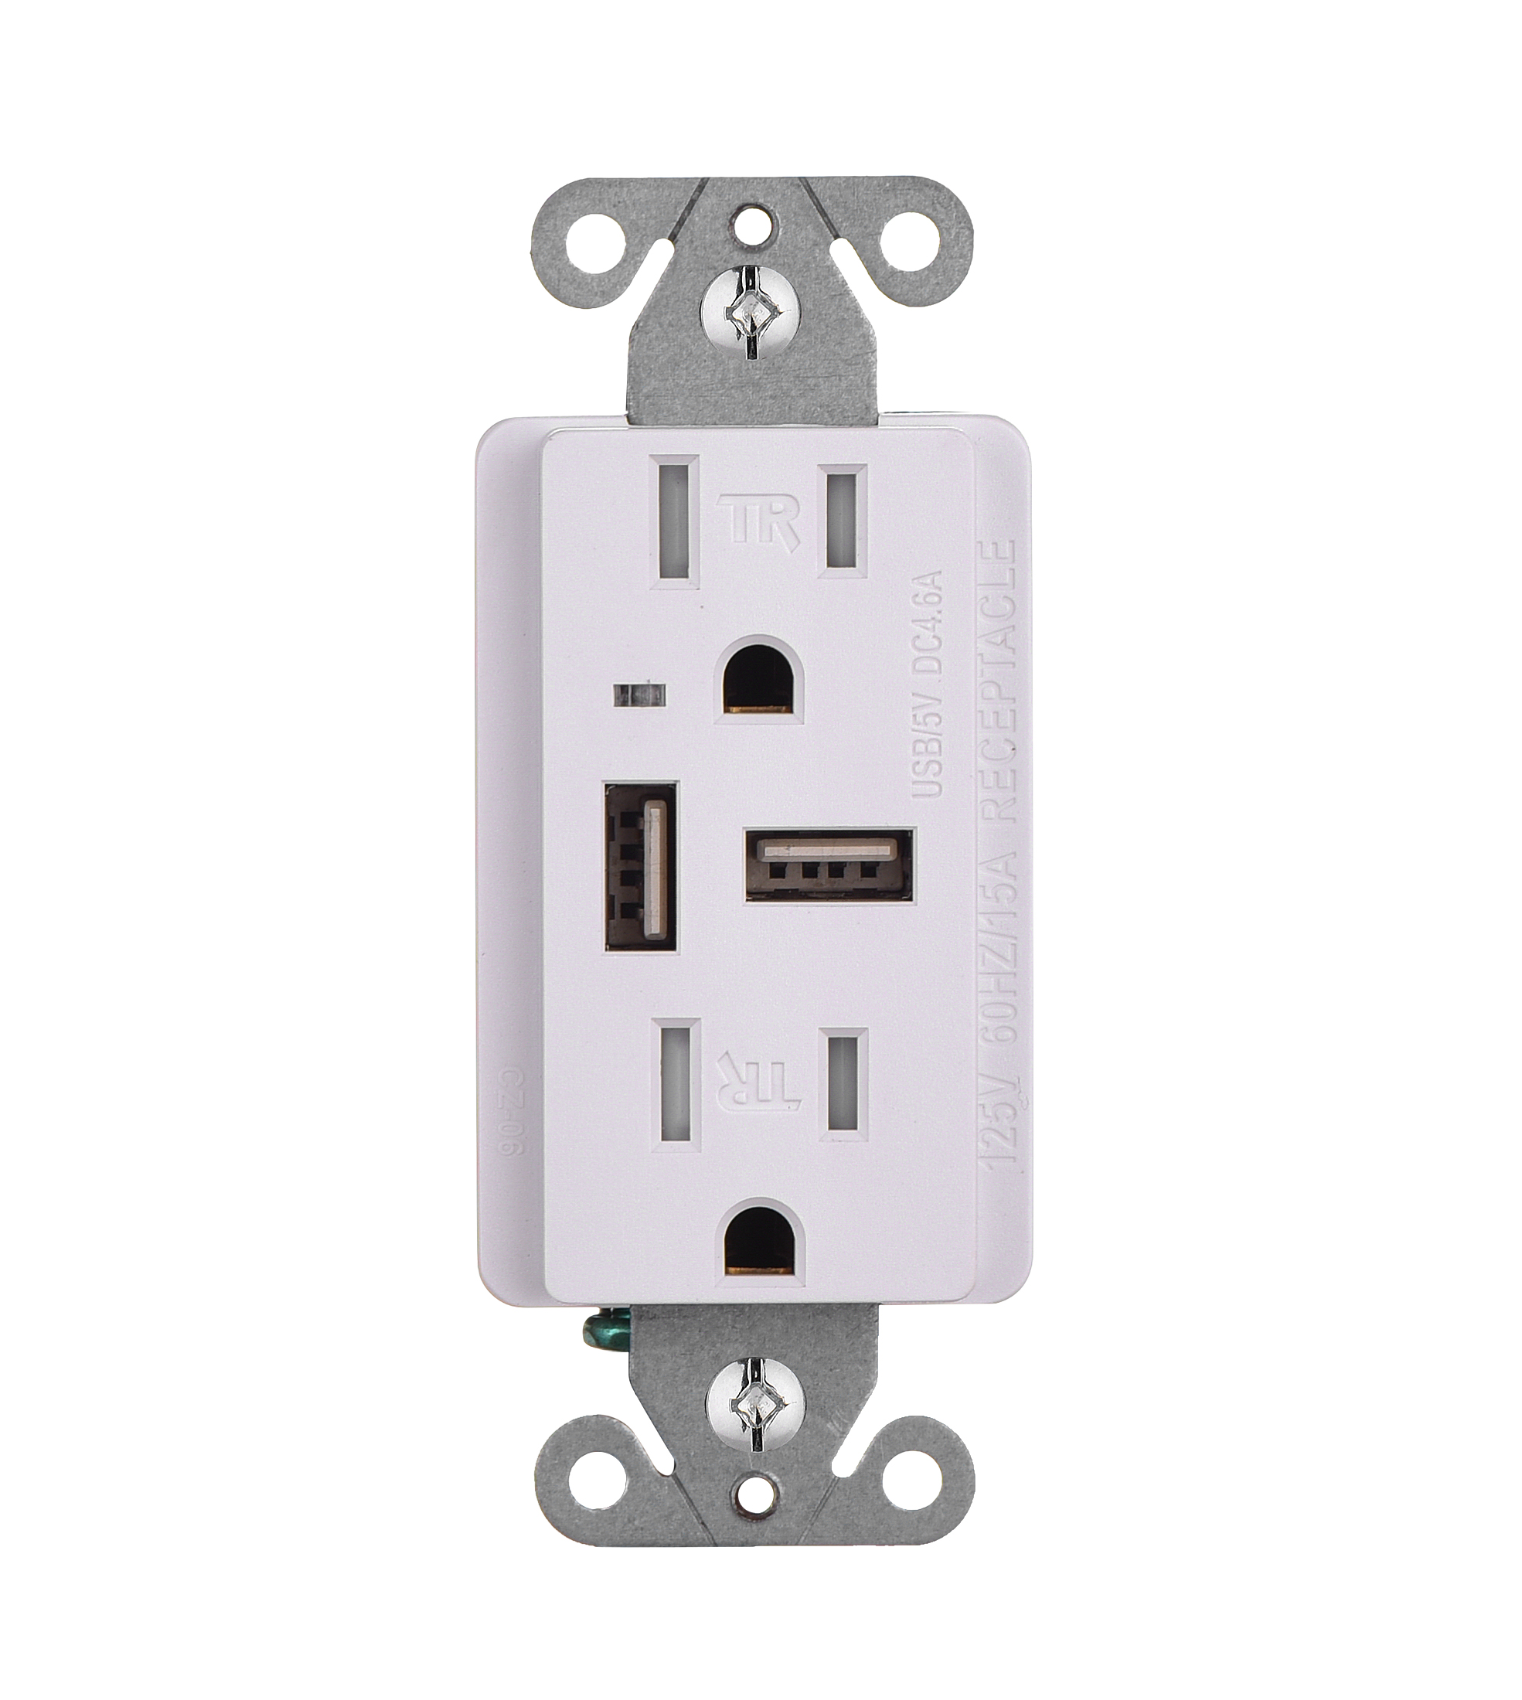 Special Design for Mexico USB Outlets - USB Wall Outlets CZ-06 – Faith Electric